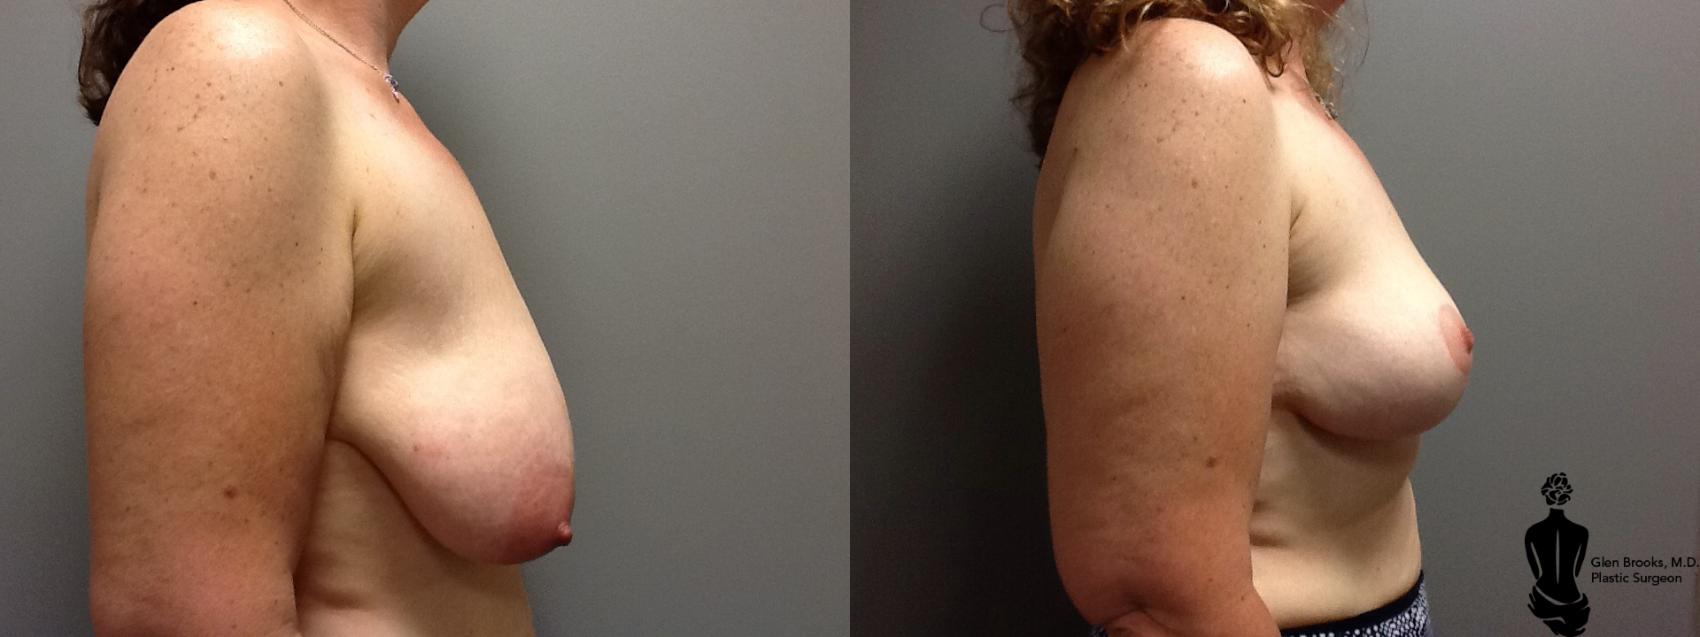 Breast Lift Before & After Photo | Springfield, MA | Aesthetic Plastic & Reconstructive Surgery